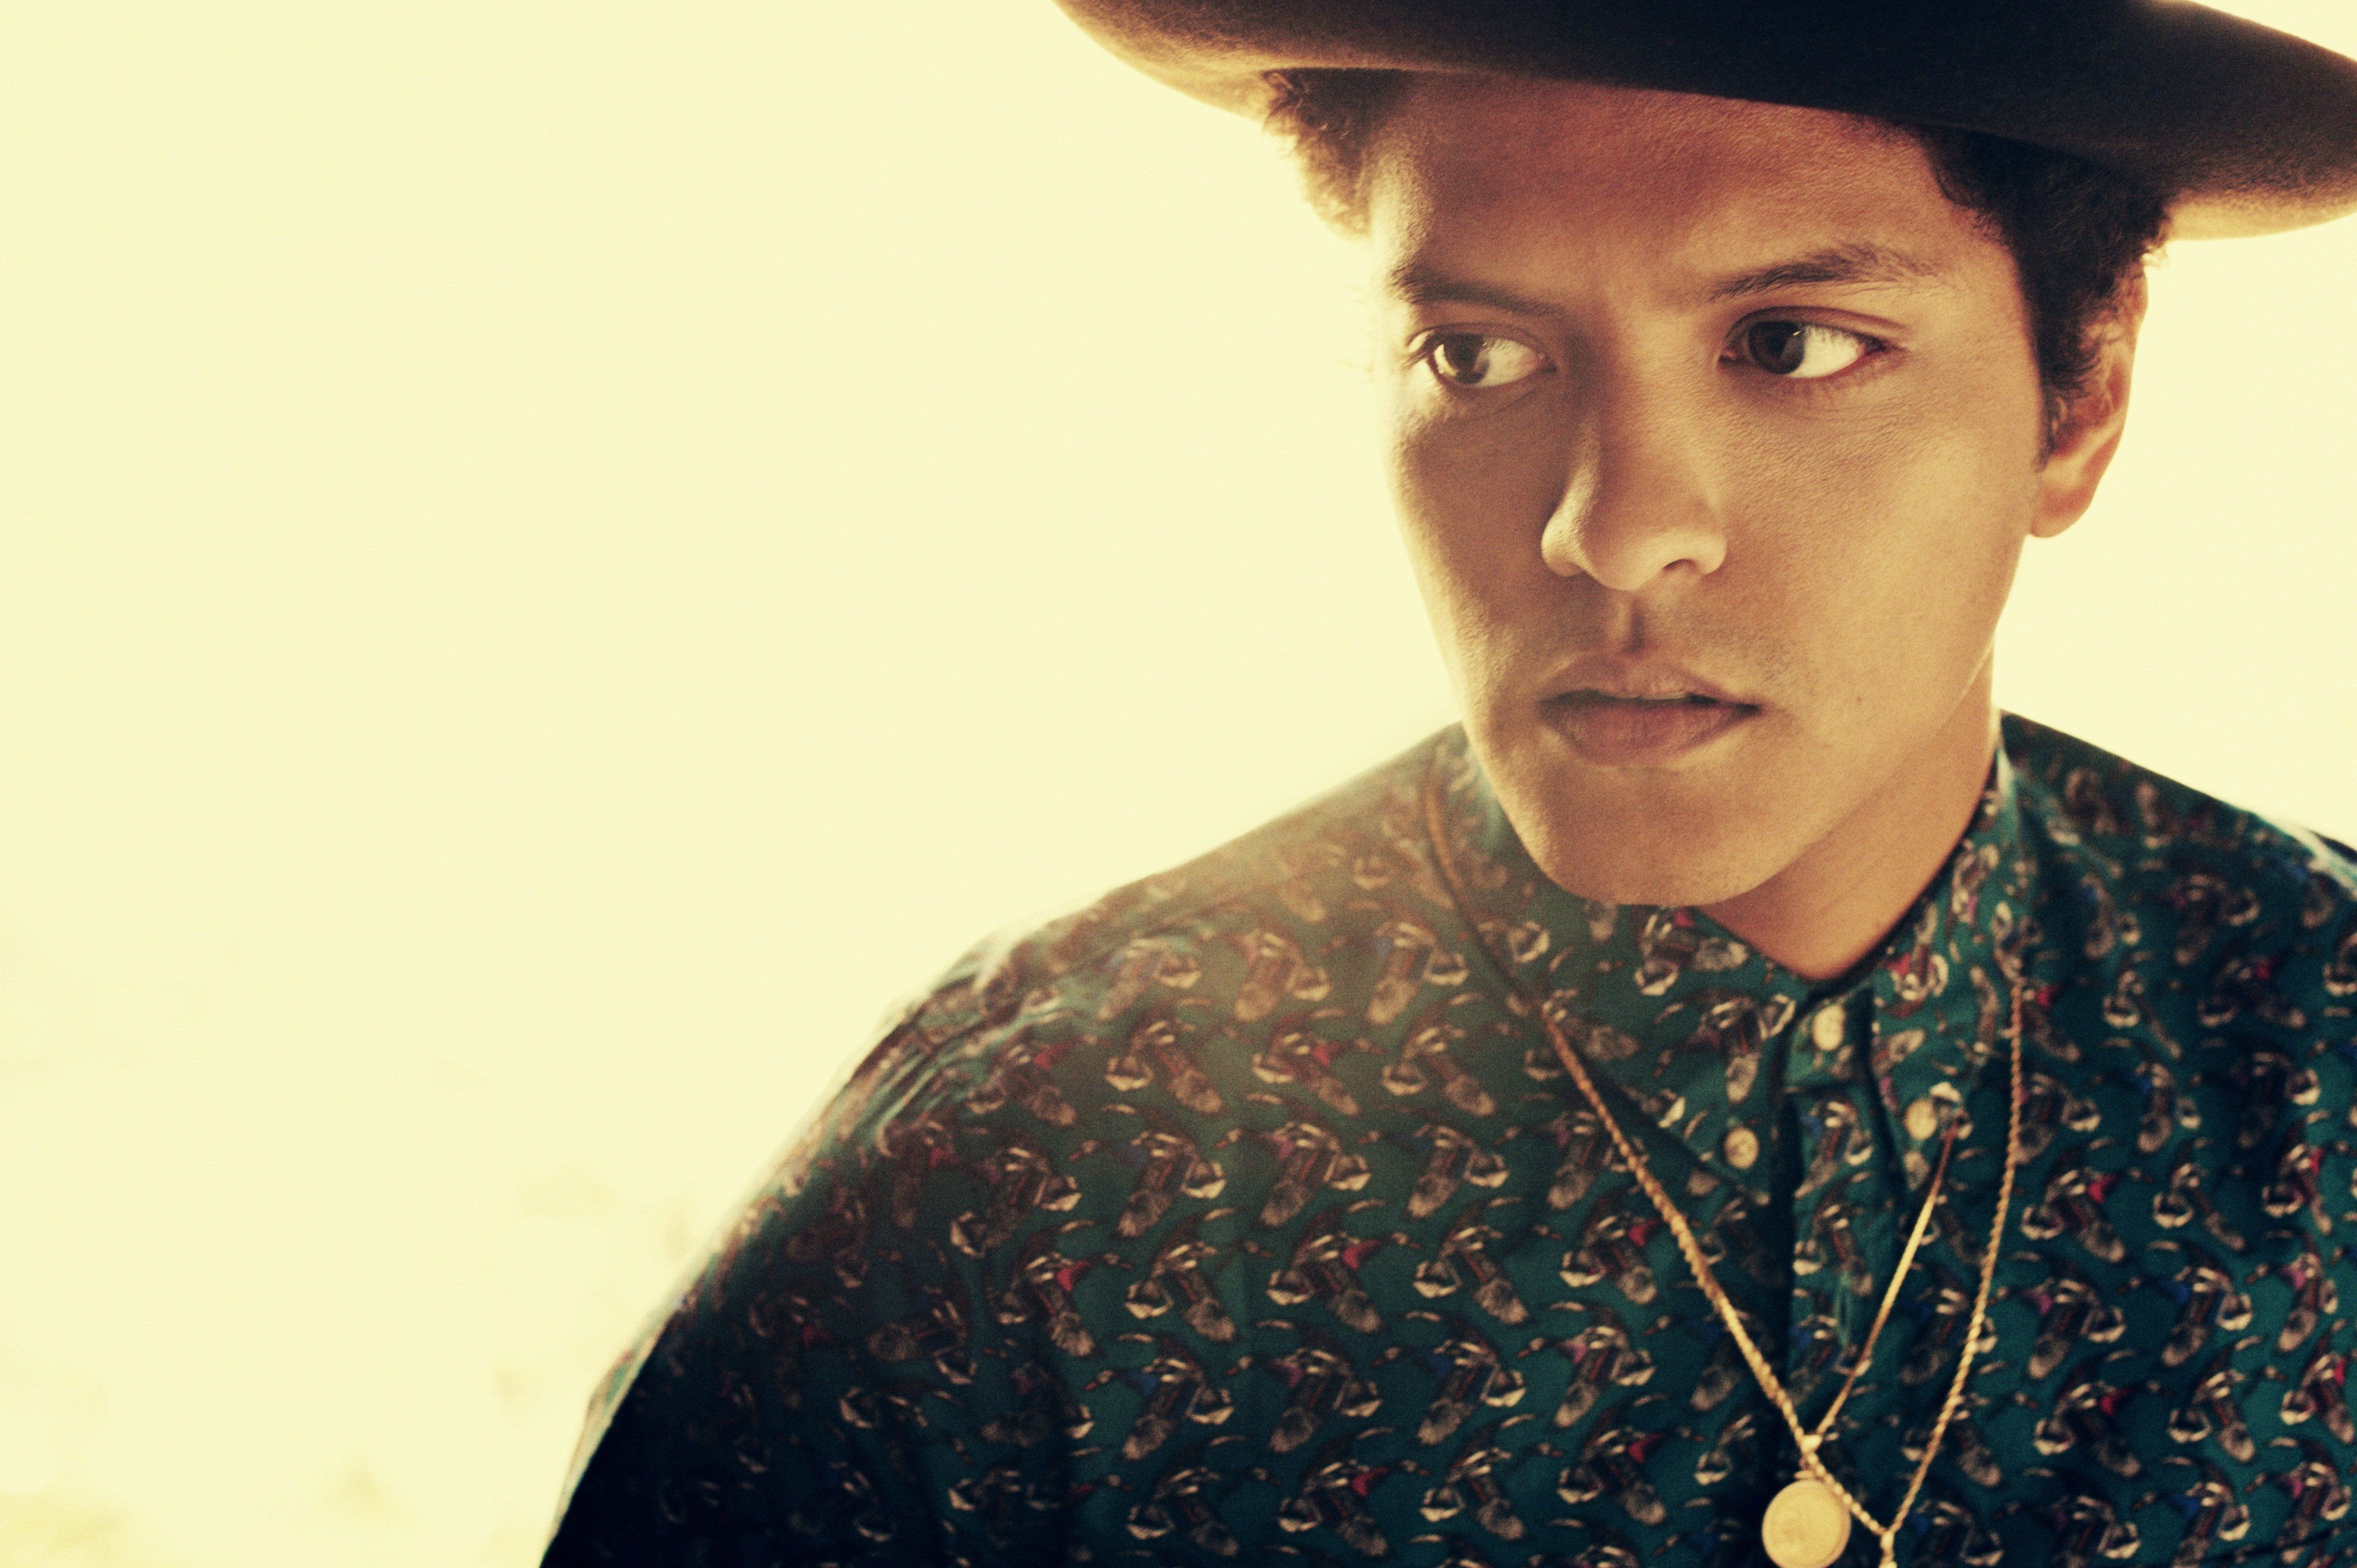 A man with hat and shirt on - Bruno Mars